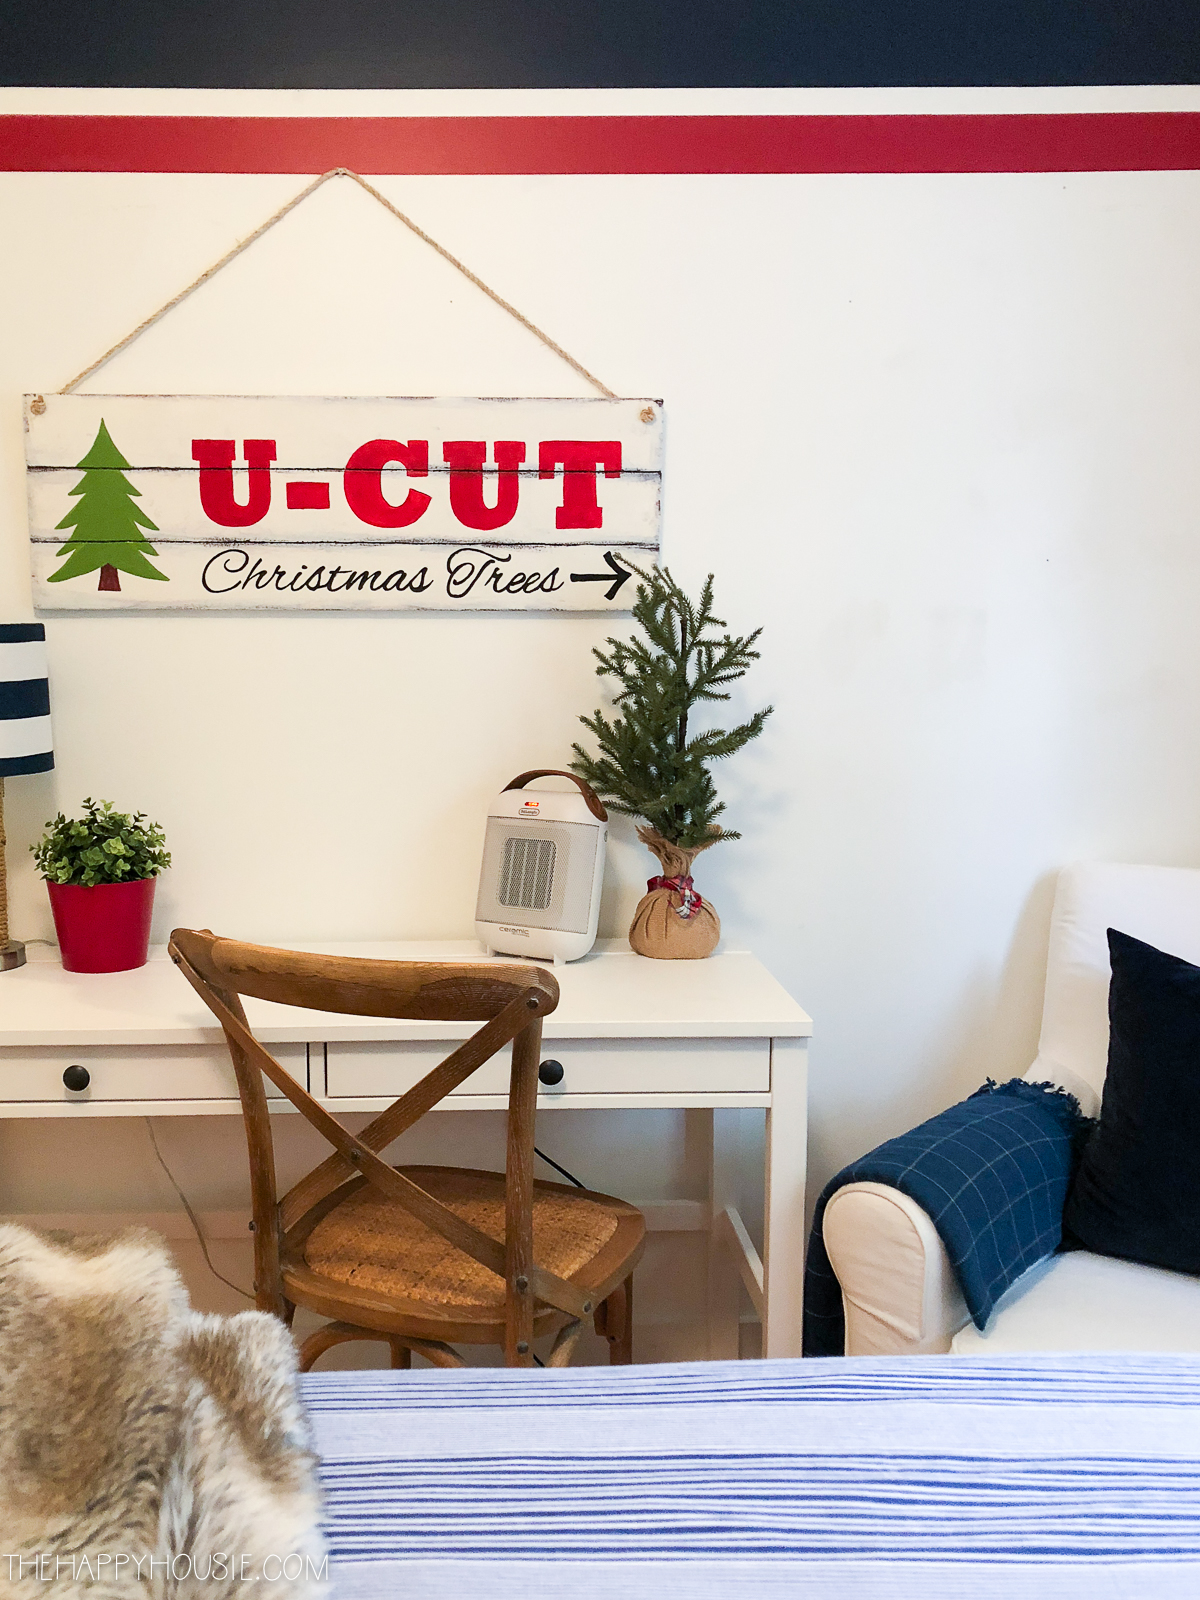 Small plant, Christmas tree, and a sign that says U-Cut Christmas Trees in the guest bedroom.